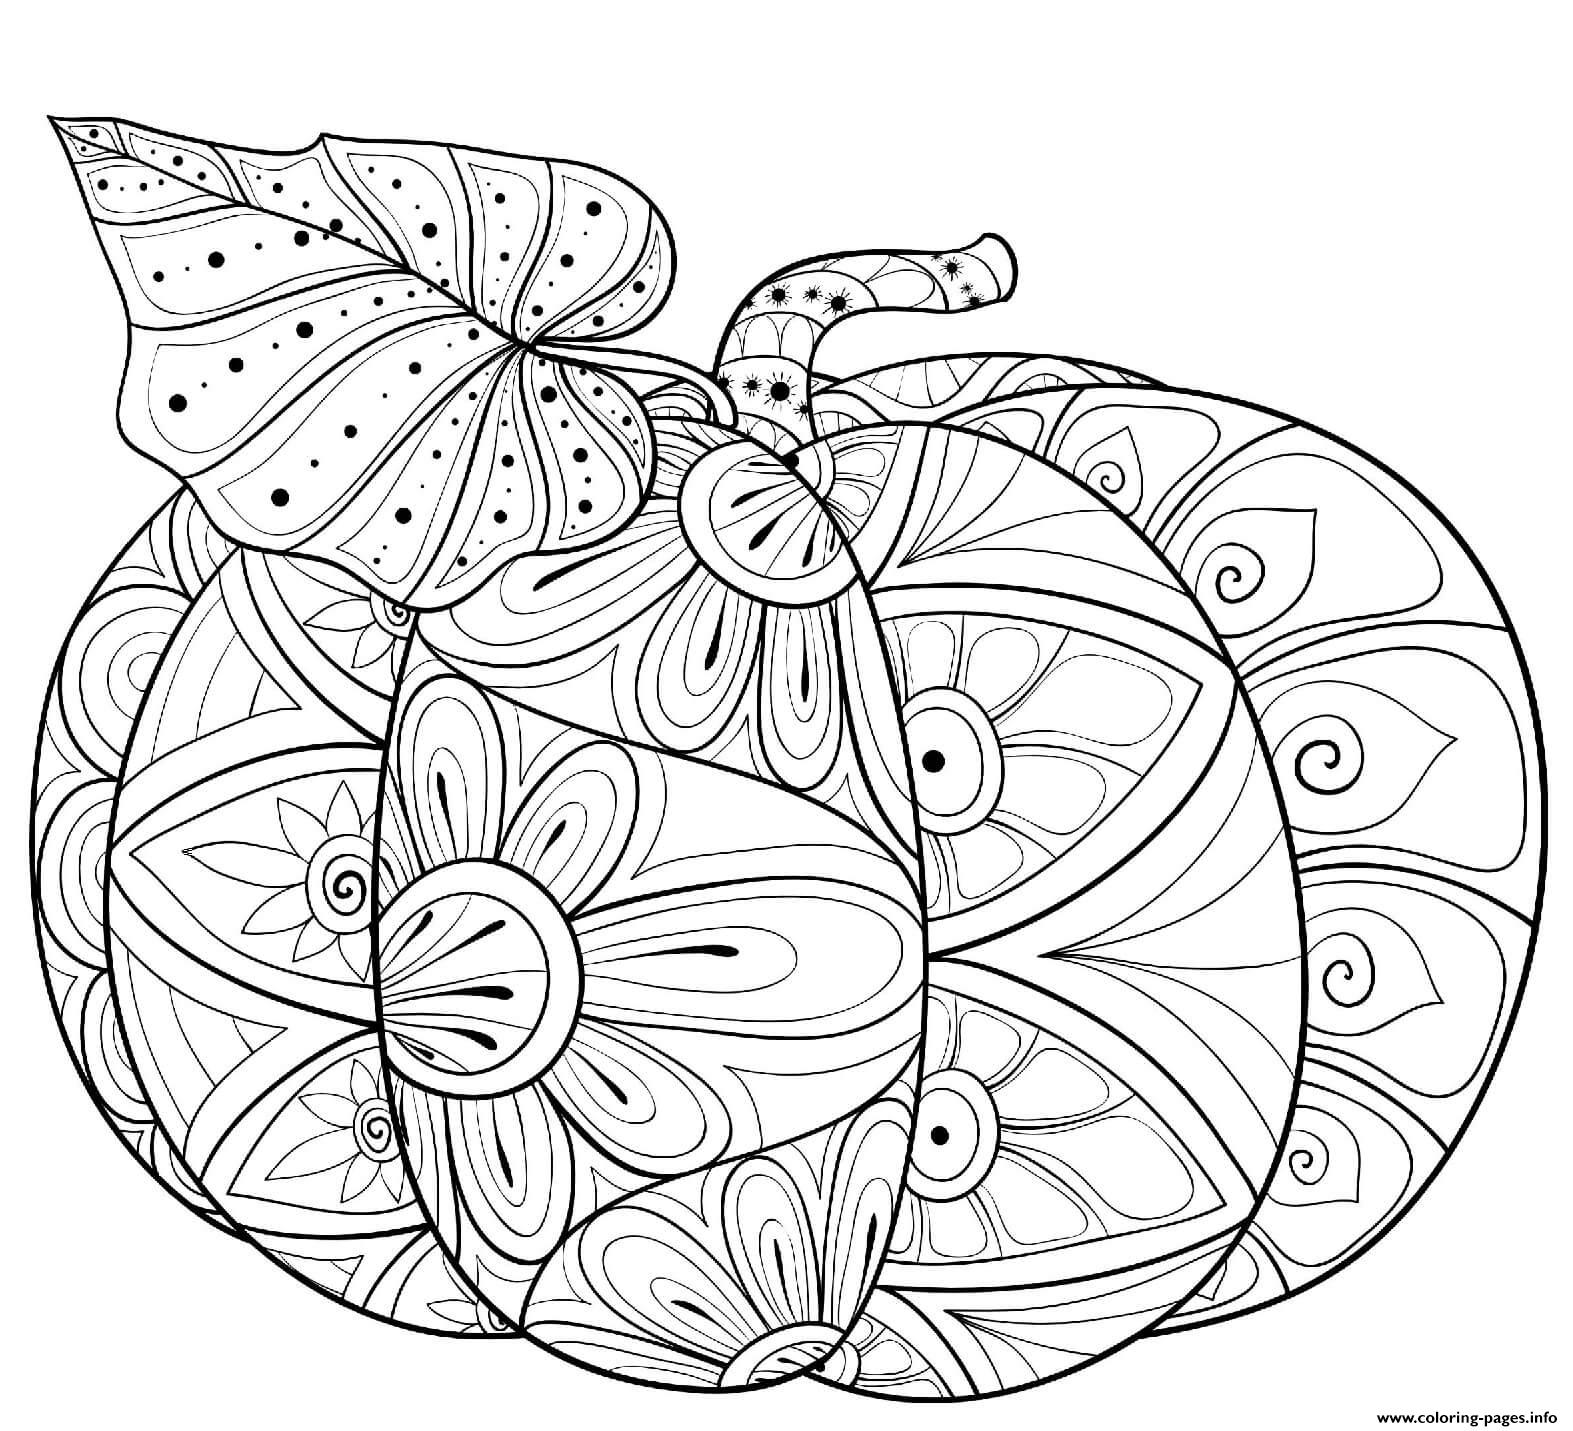 Halloween Intricate Pumpkin And Leaf coloring